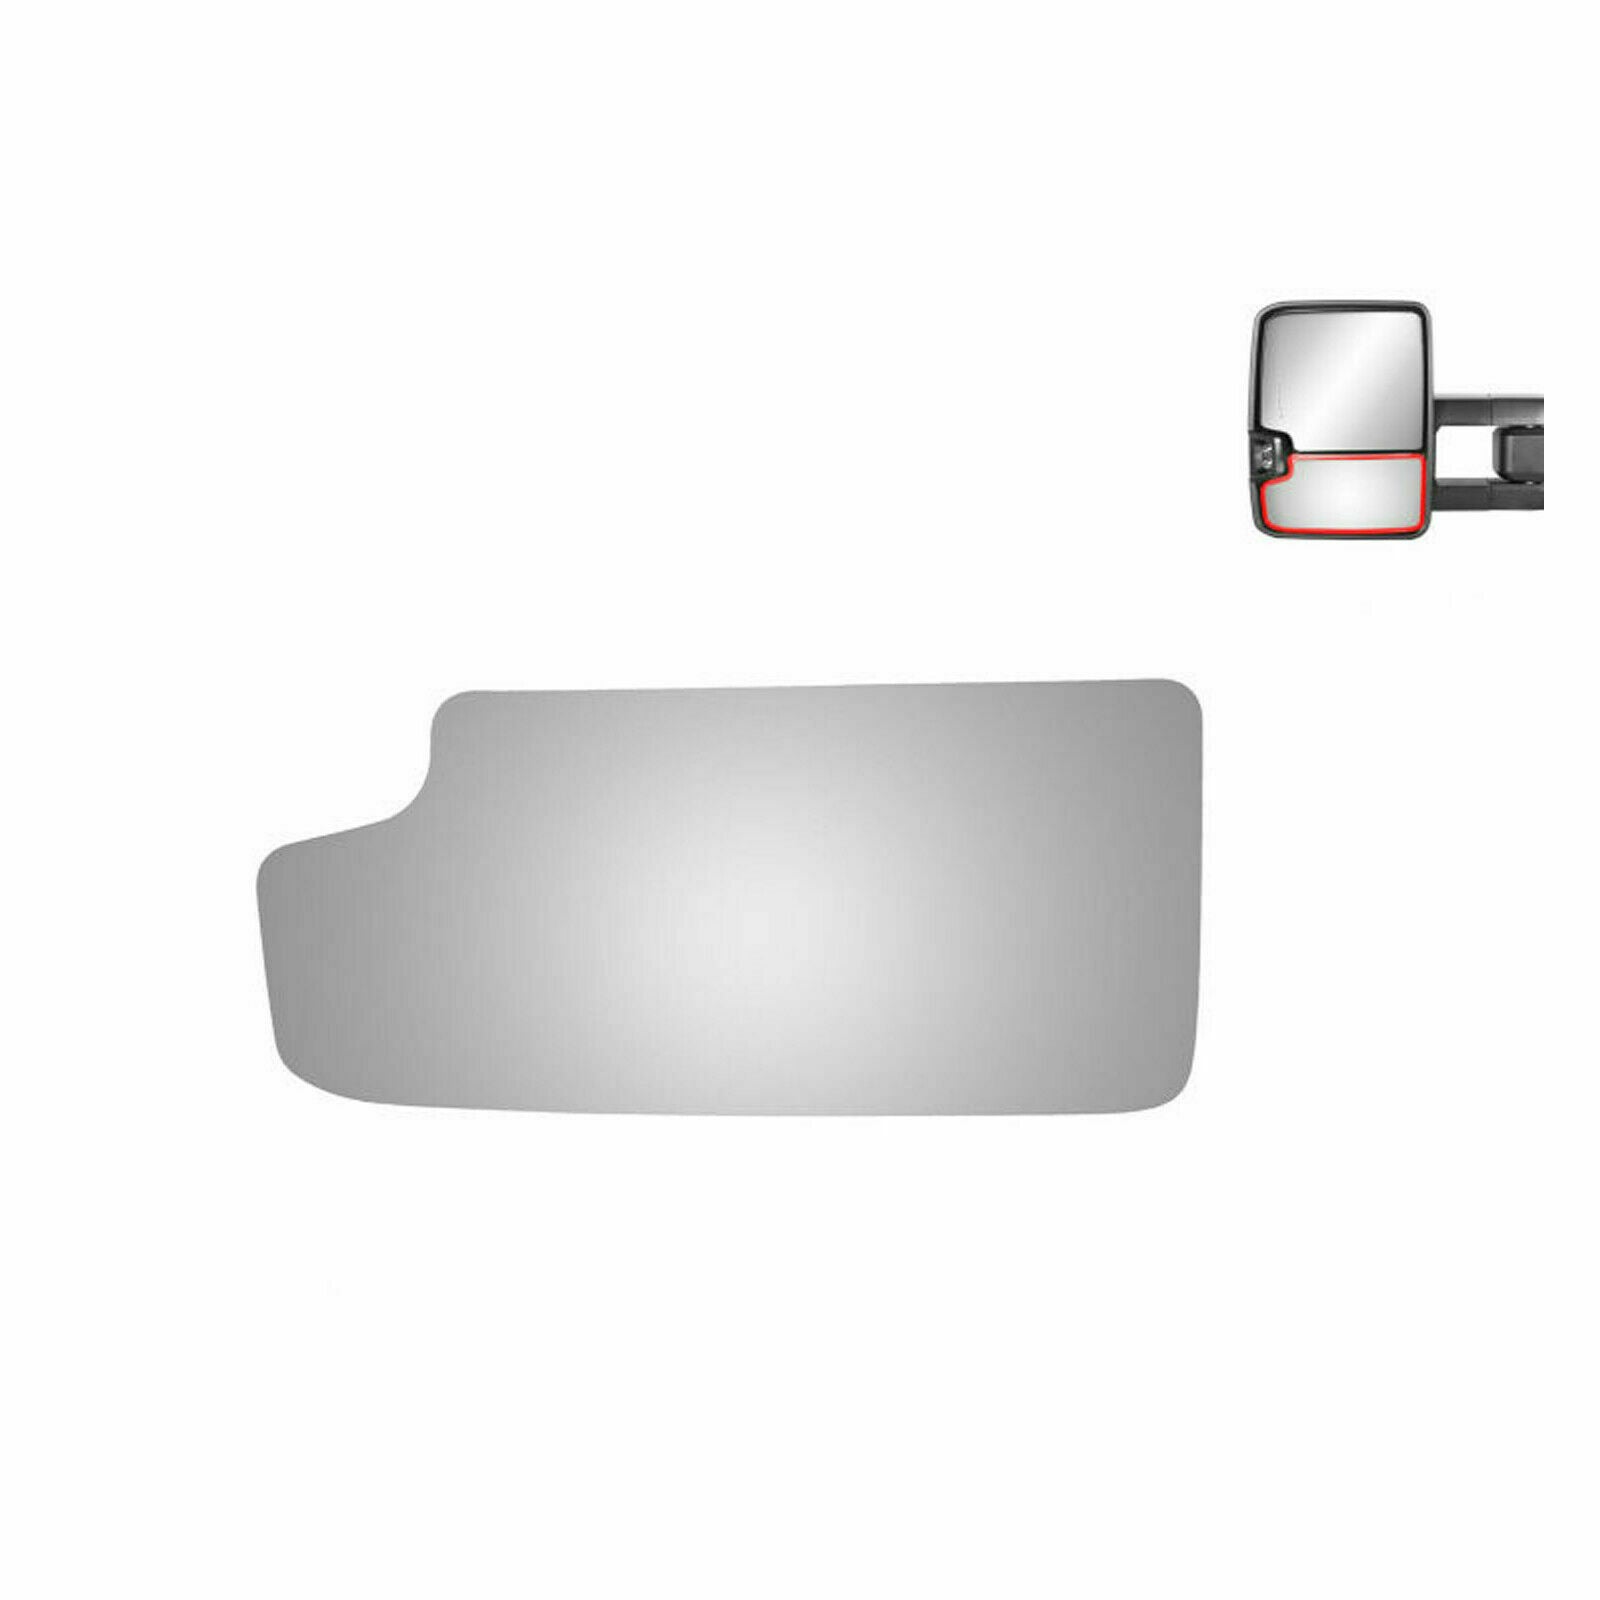 WLLW Lower Towing Mirror Glass Replace for Cadillac Escalade/ Chevrolet Avalanche Blazer Silverado Suburban Tahoe/ GMC Jimmy Sierra Yukon, Driver Left /Passenger Right /The Both Sides Convex M-0020